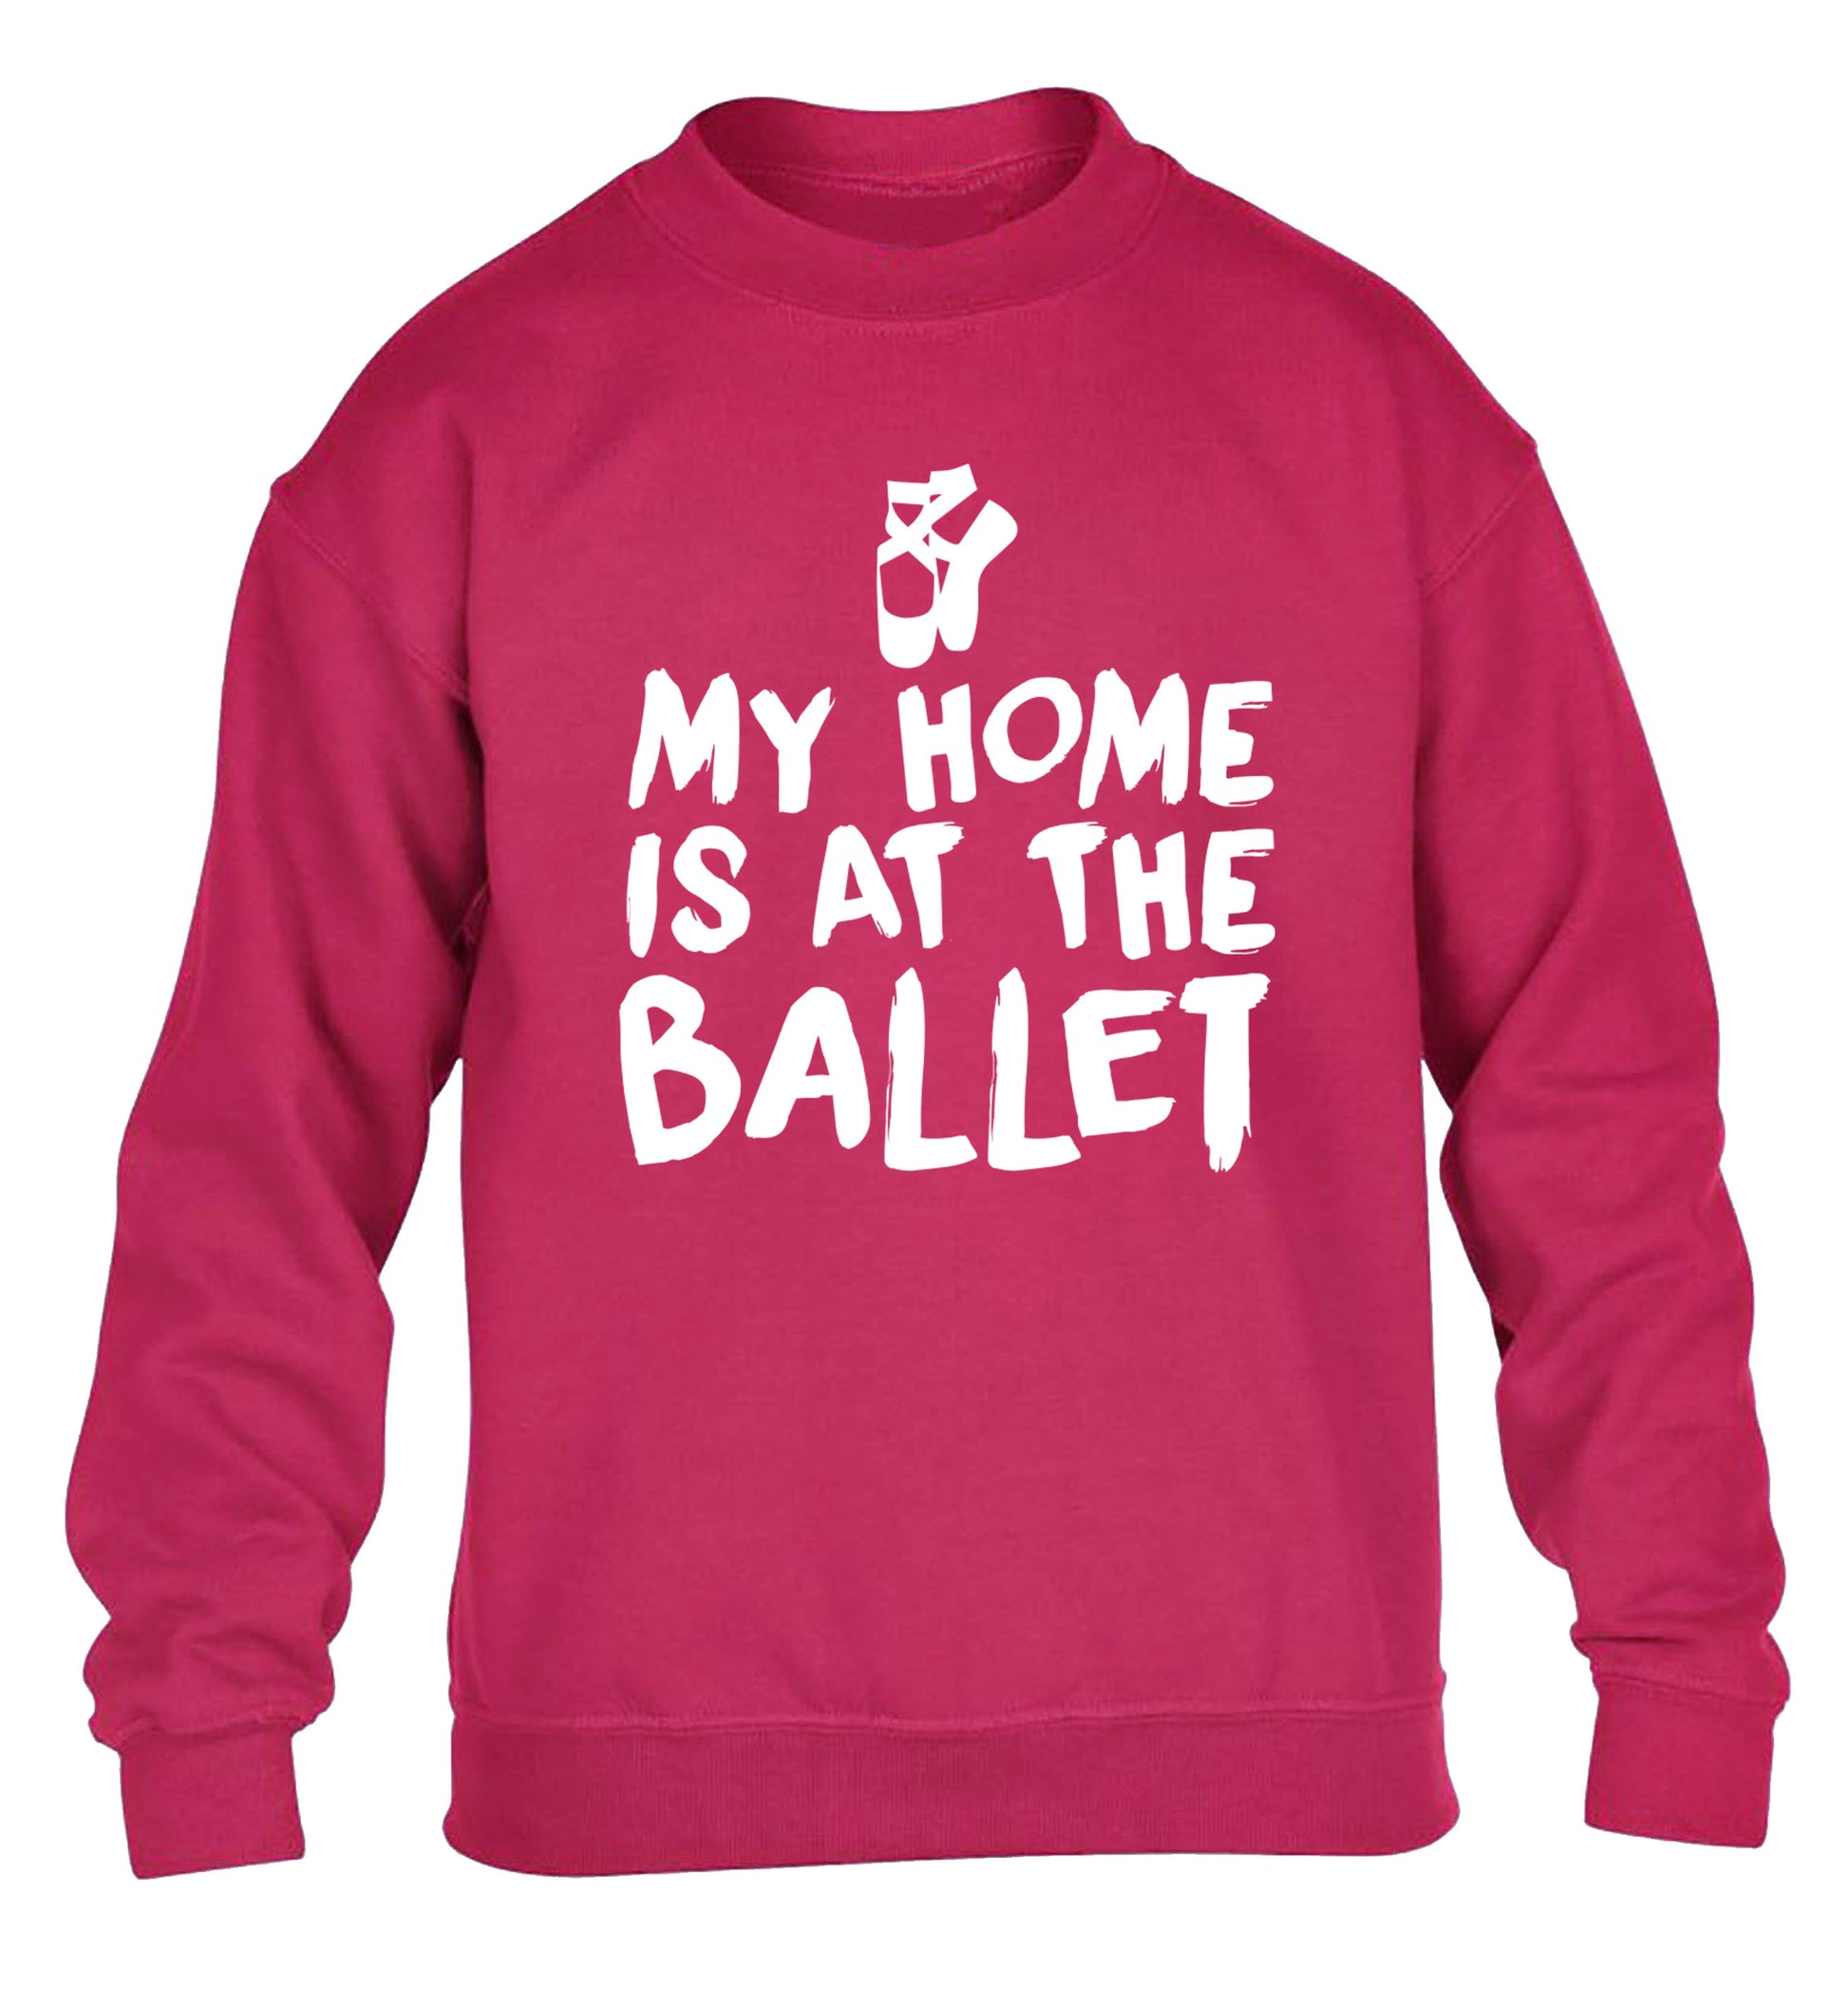 My home is at the ballet children's pink sweater 12-14 Years